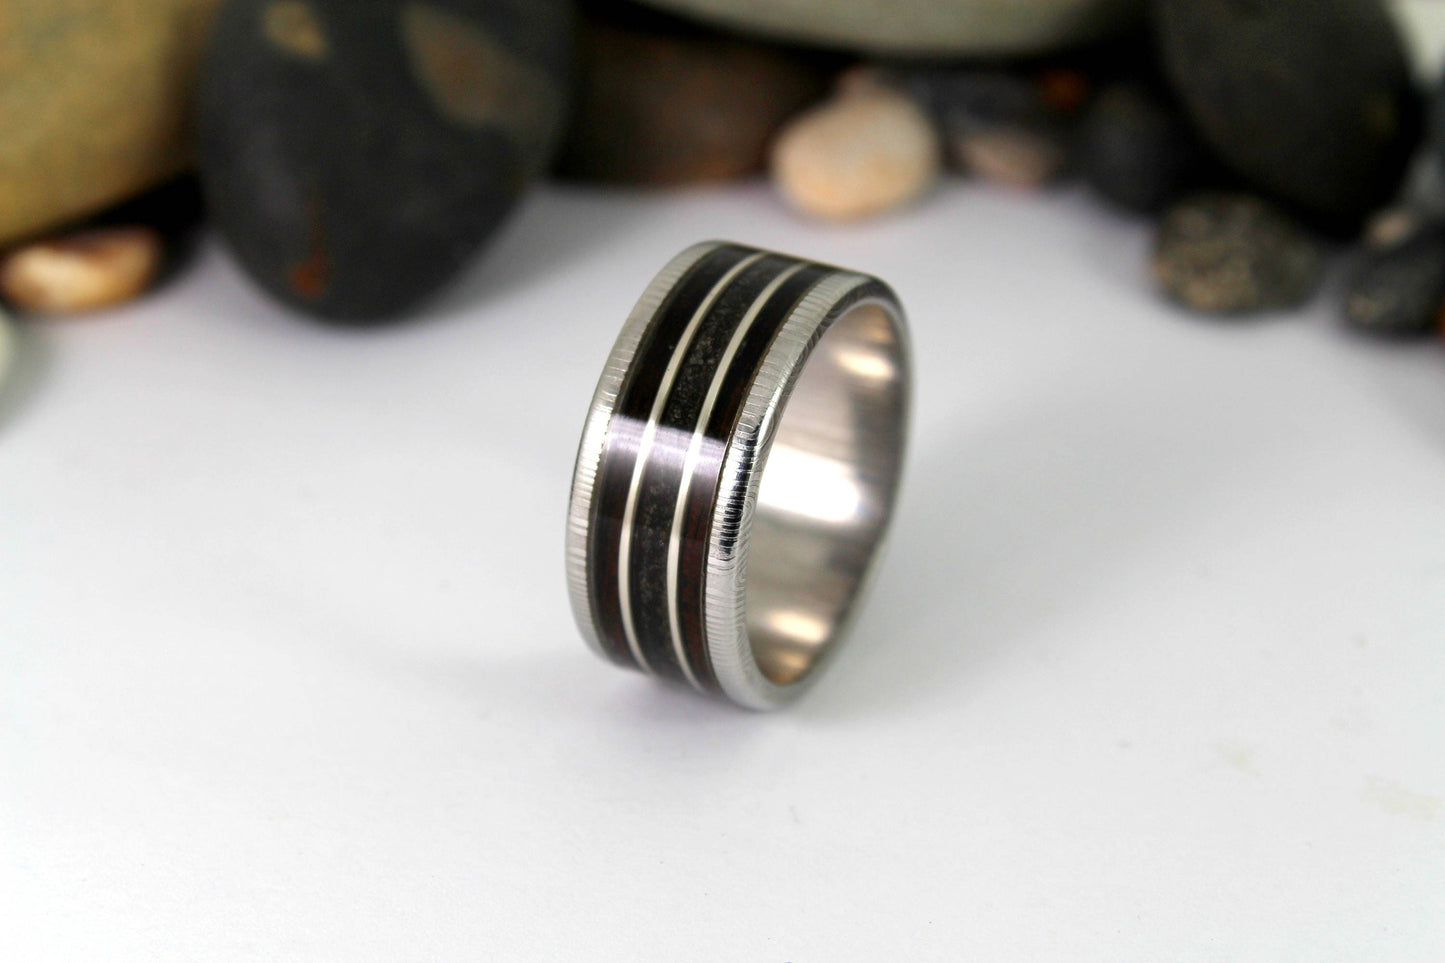 Damascus Steel Ring With Megalodon Tooth, Silver and Wood Inlay